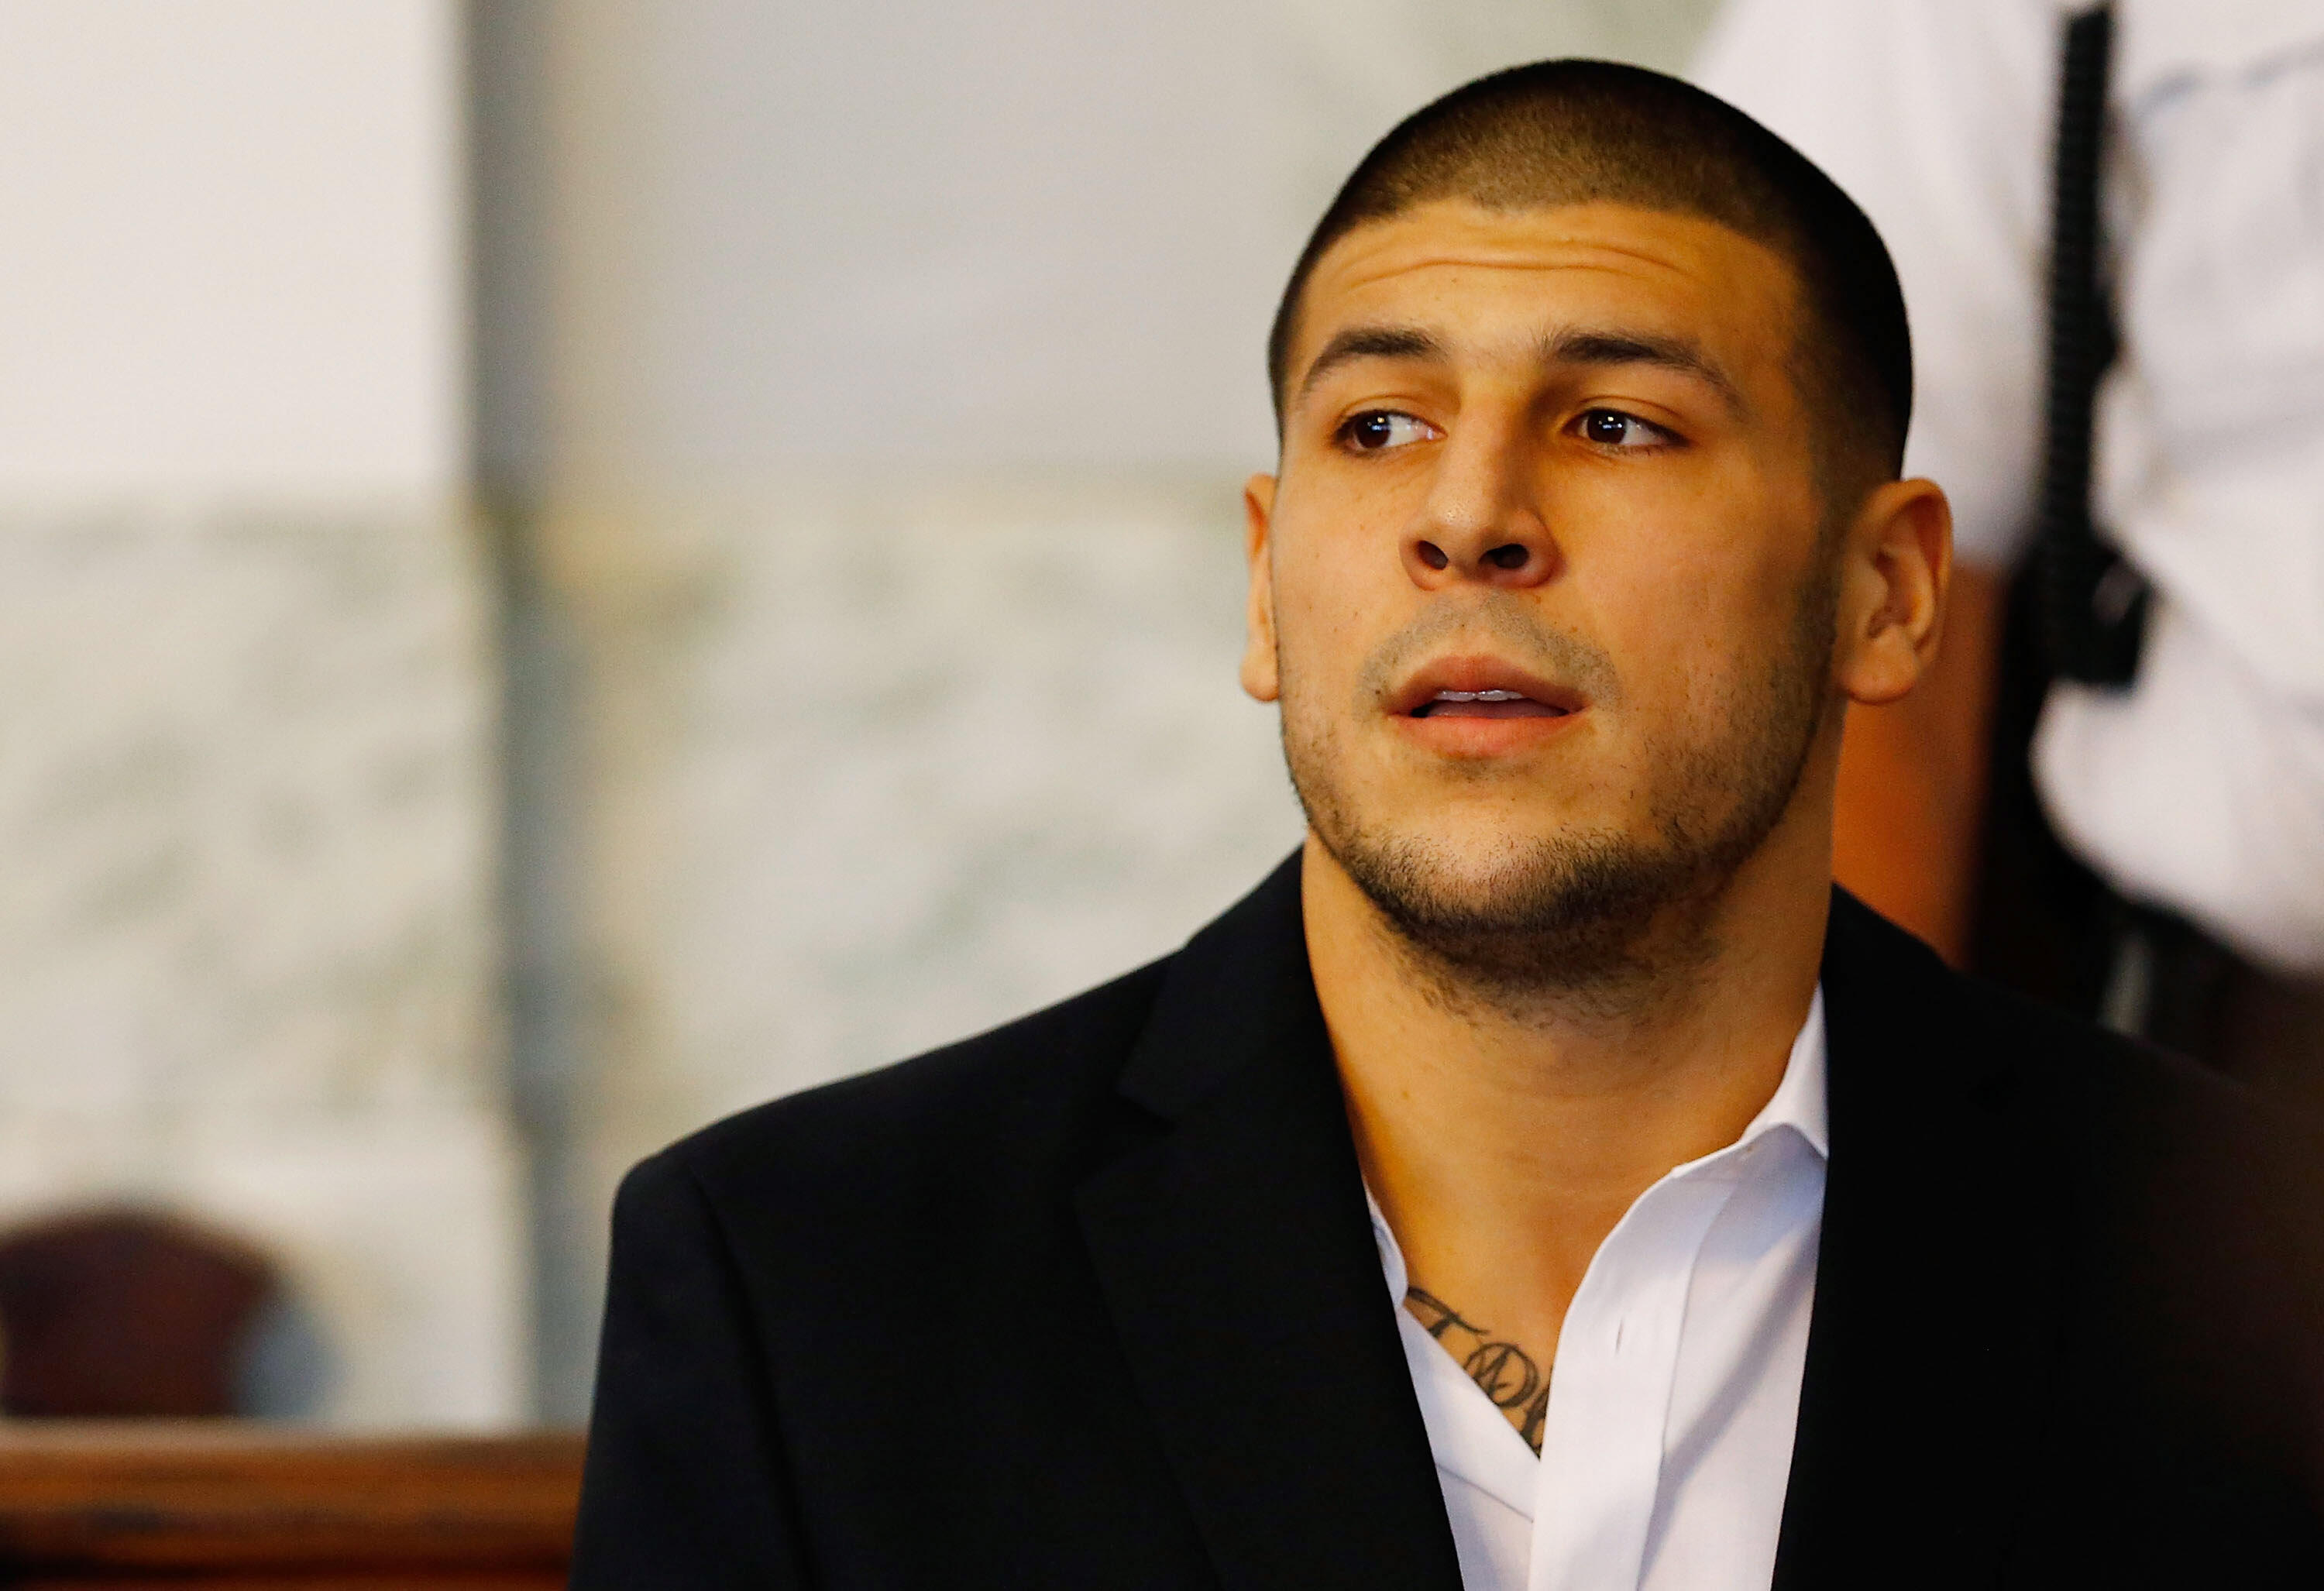 NORTH ATTLEBORO, MA - AUGUST 22: Aaron Hernandez sits in the courtroom of the Attleboro District Court during his hearing on August 22, 2013 in North Attleboro, Massachusetts. Former New England Patriot Aaron Hernandez has been indicted on a first-degree 